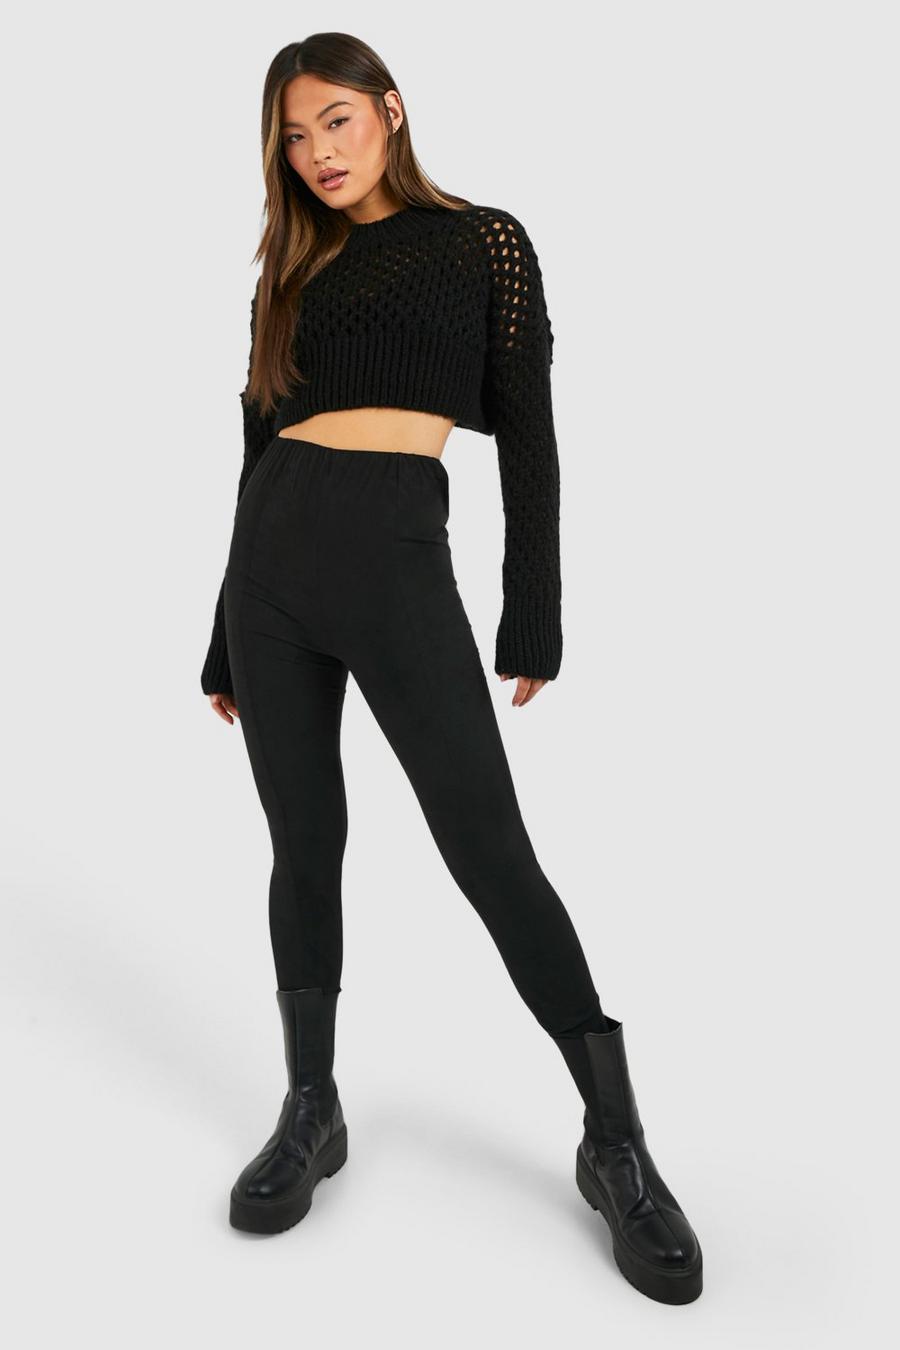 Black Seam Front High Waisted Soft Touch Suedette Leggings